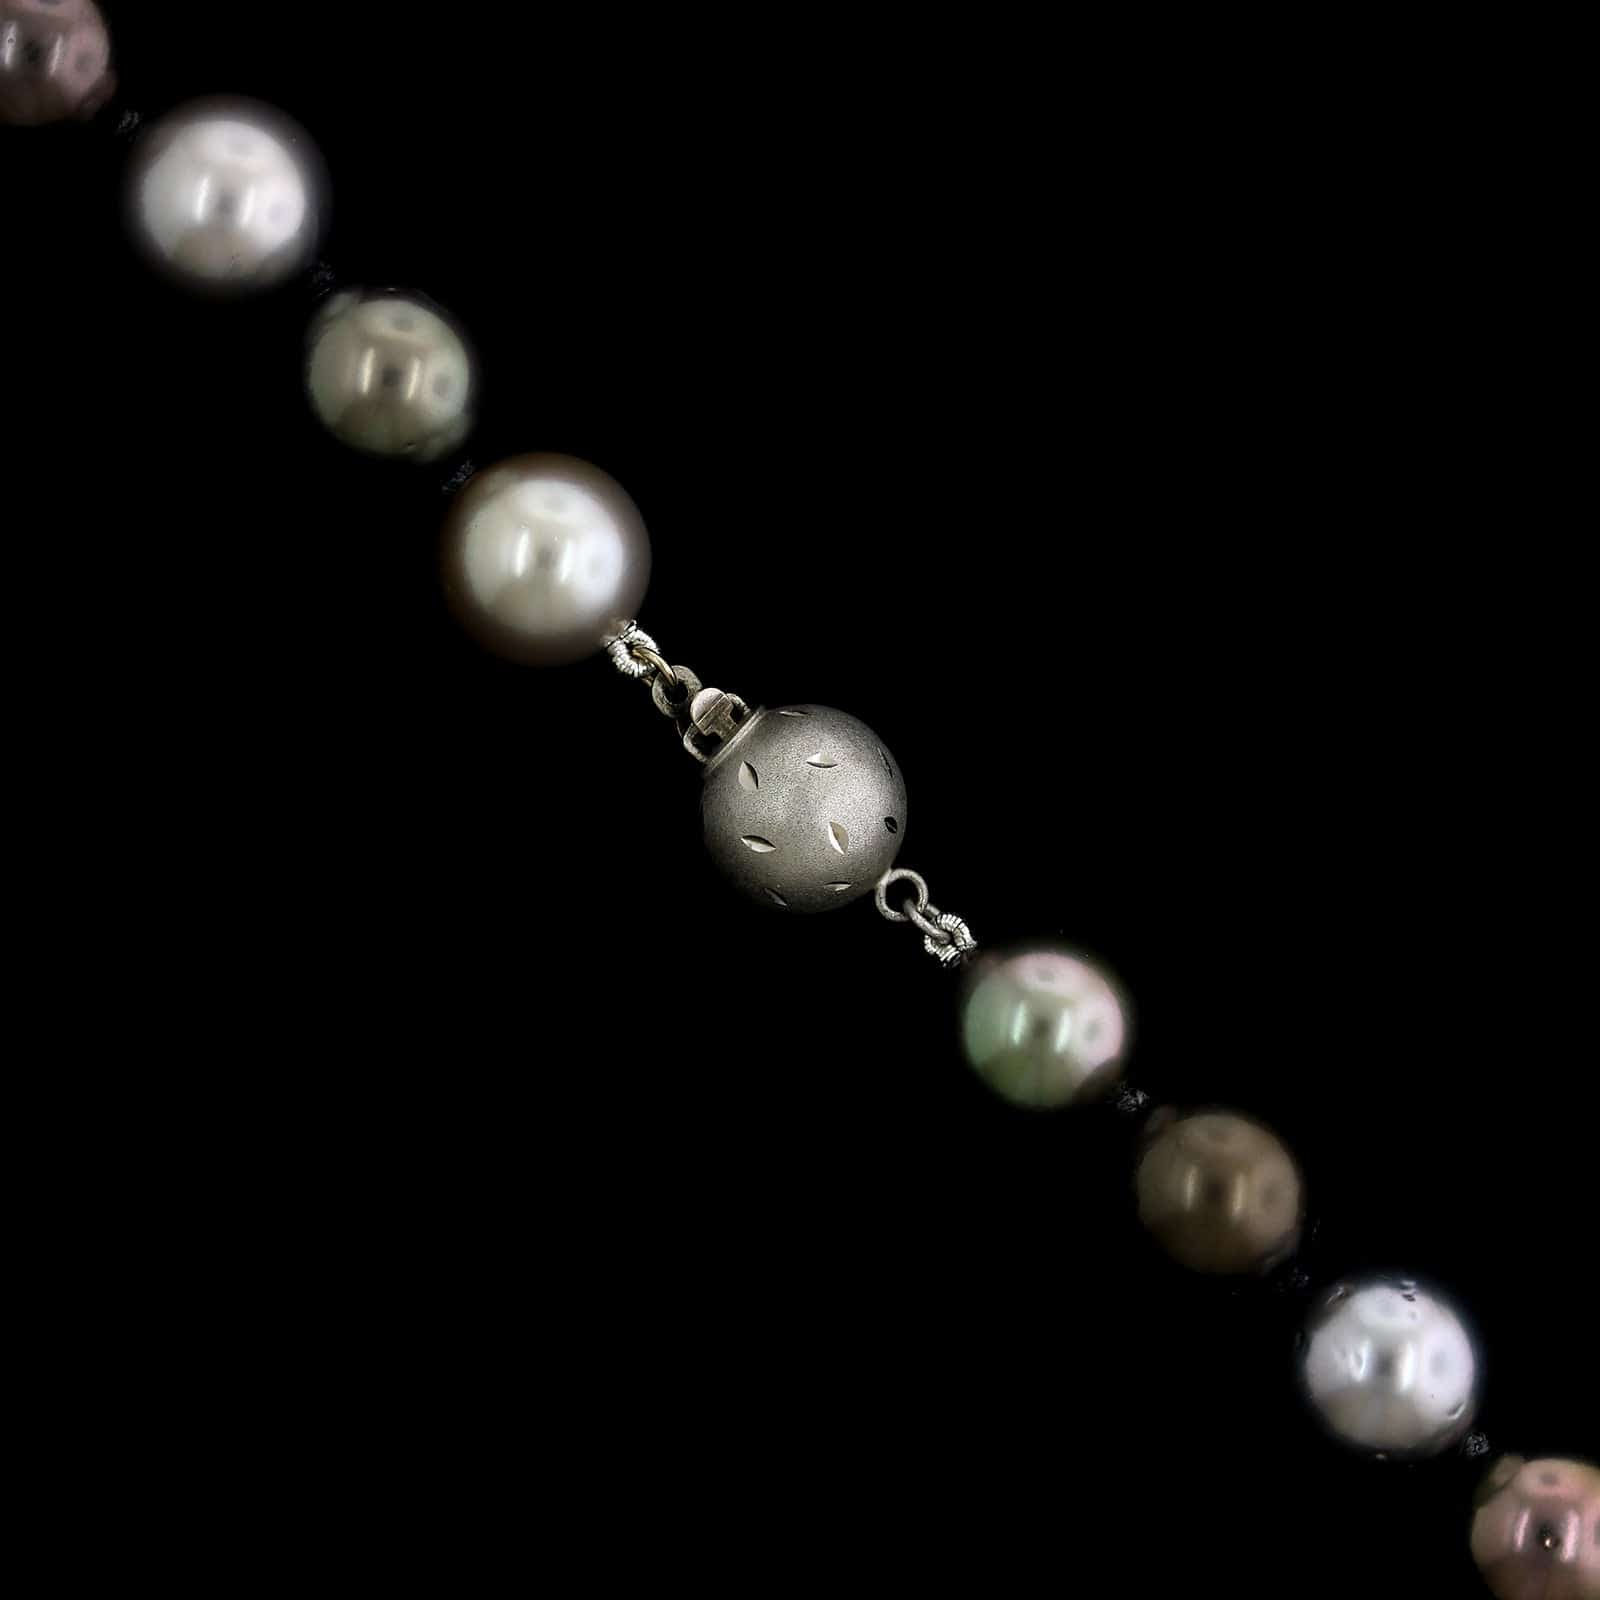 Tahitian Estate Cultured South Sea Pearl Necklace